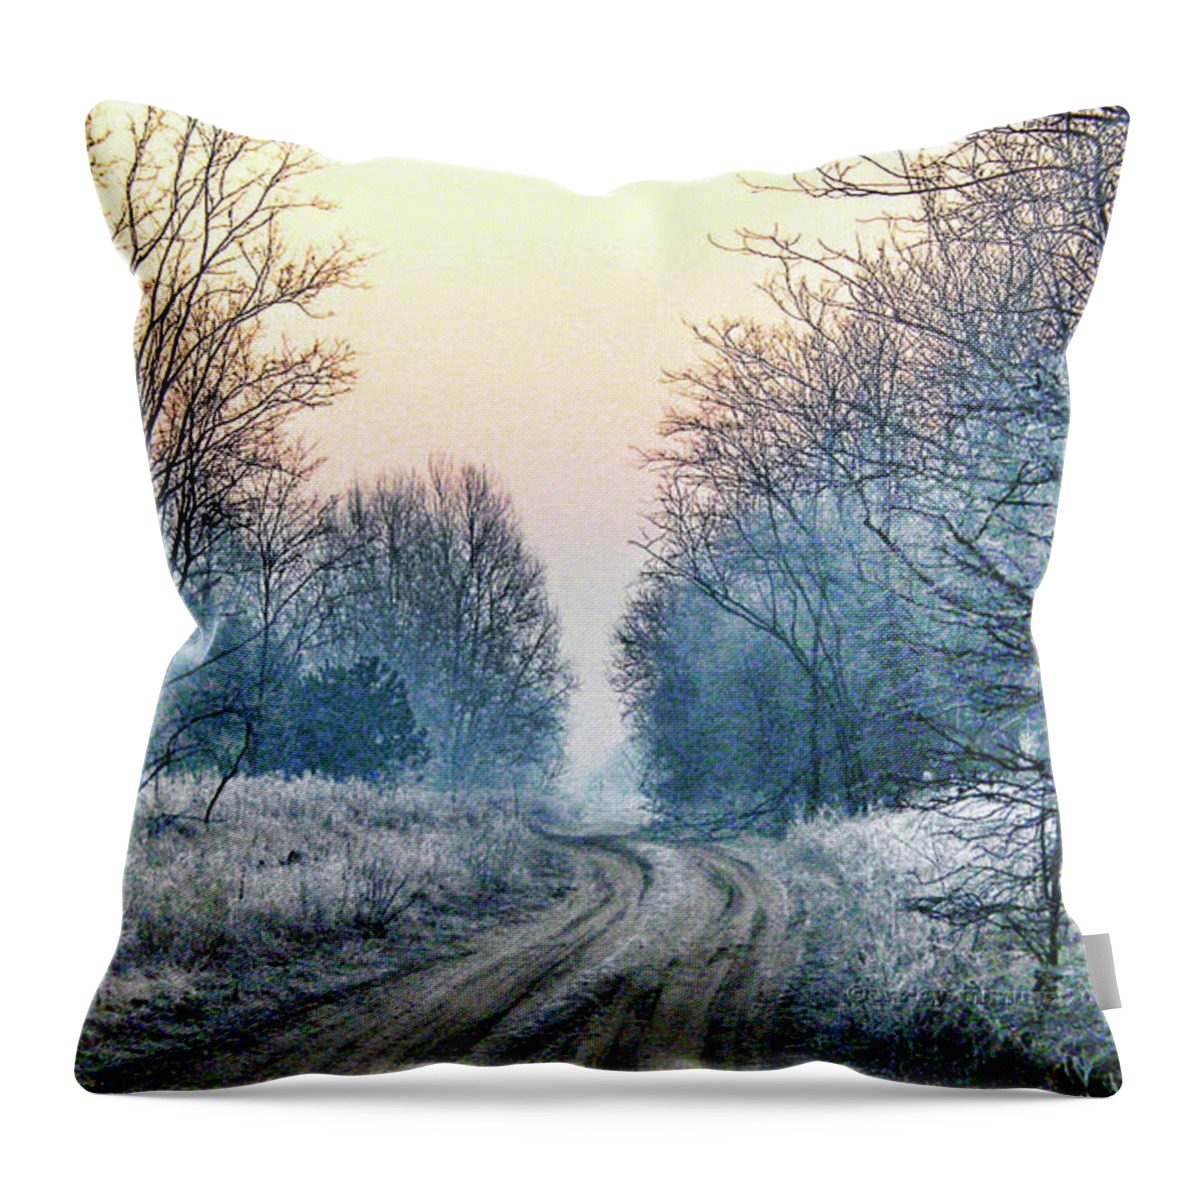 Woods Throw Pillow featuring the photograph Through the Woods by Mimulux Patricia No